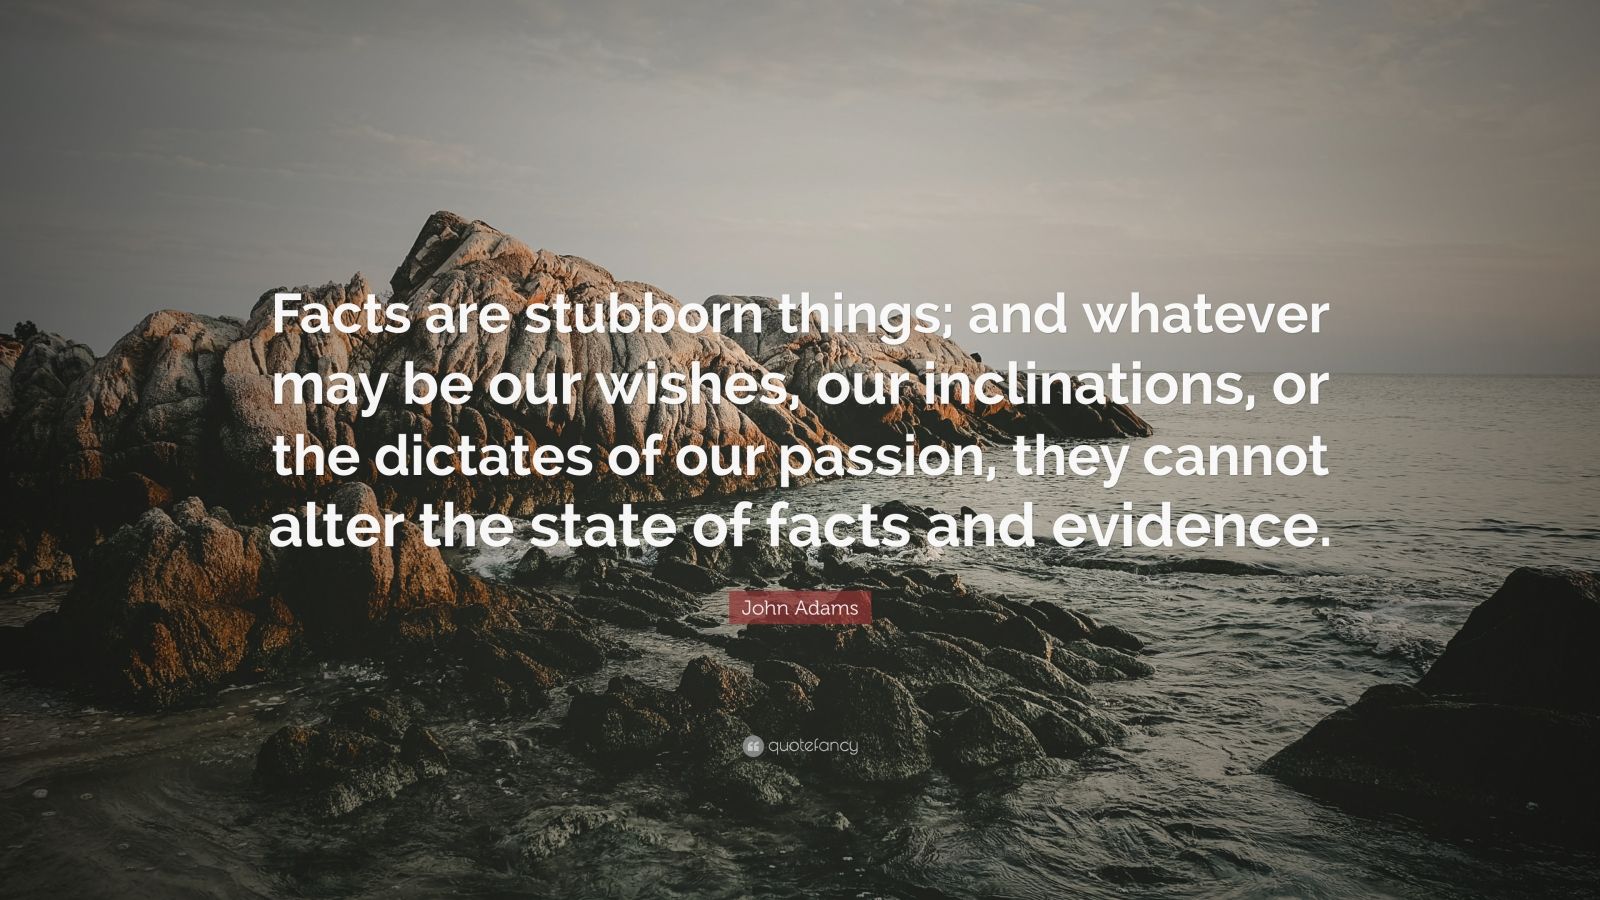 John Adams Quote: “Facts are stubborn things; and whatever may be our ...